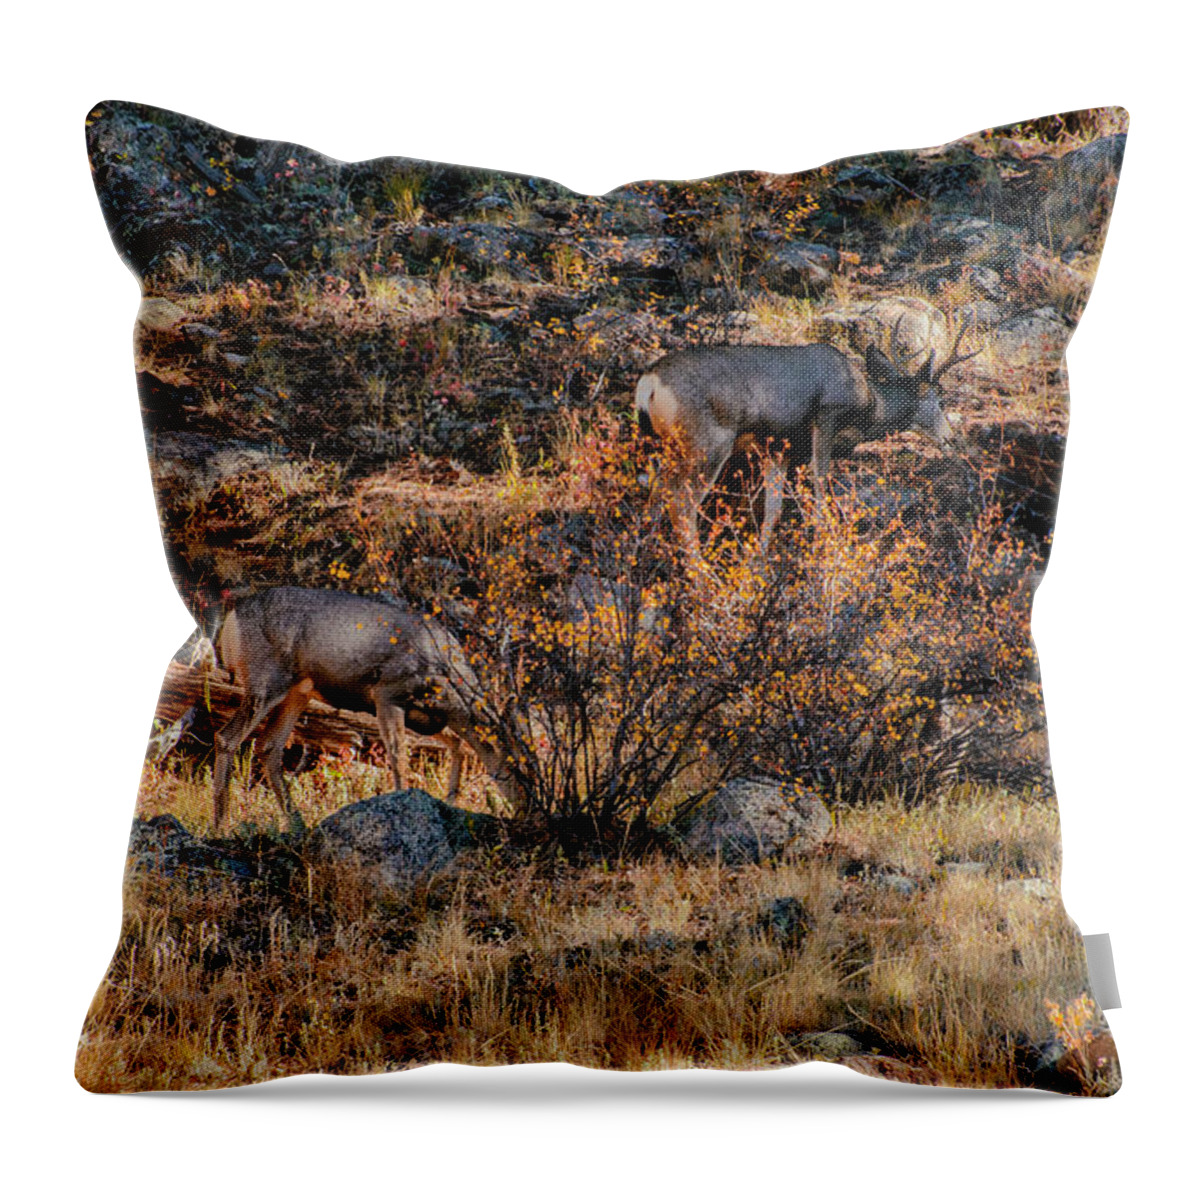  Throw Pillow featuring the photograph Rocky Mountain National Park Deer Colorado by Paul Vitko